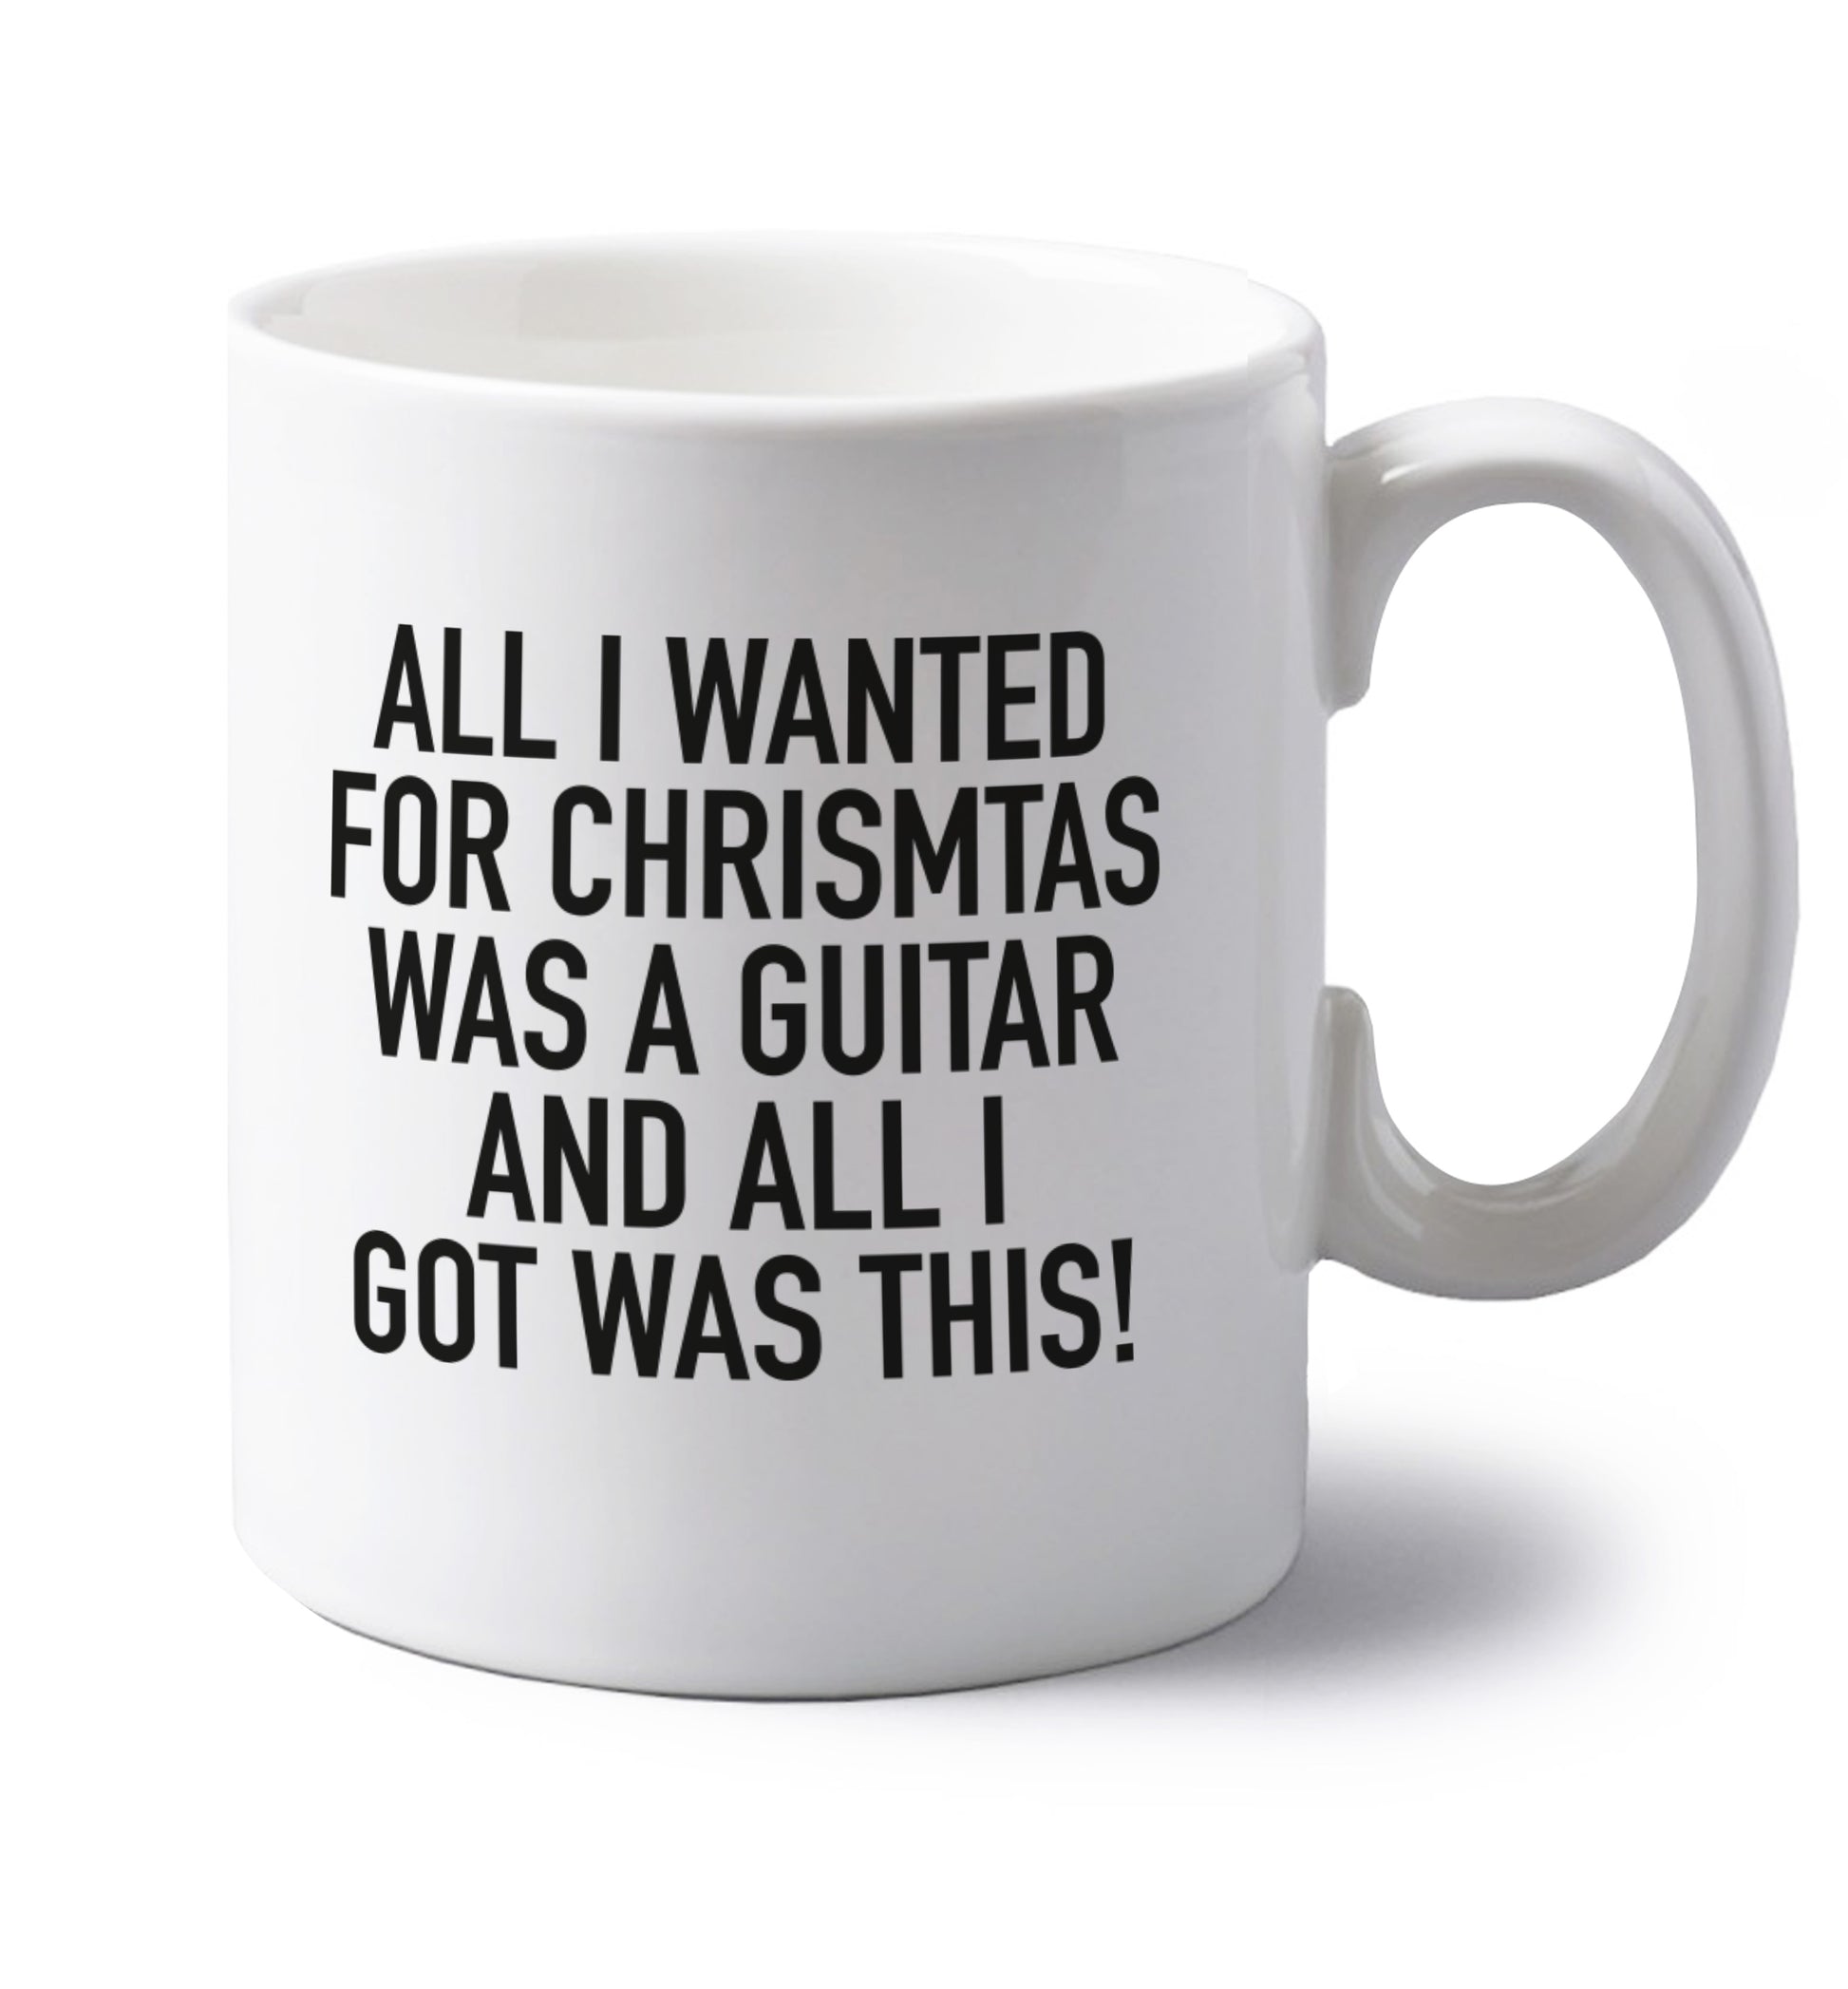 All I wanted for Christmas was a guitar and all I got was this! left handed white ceramic mug 